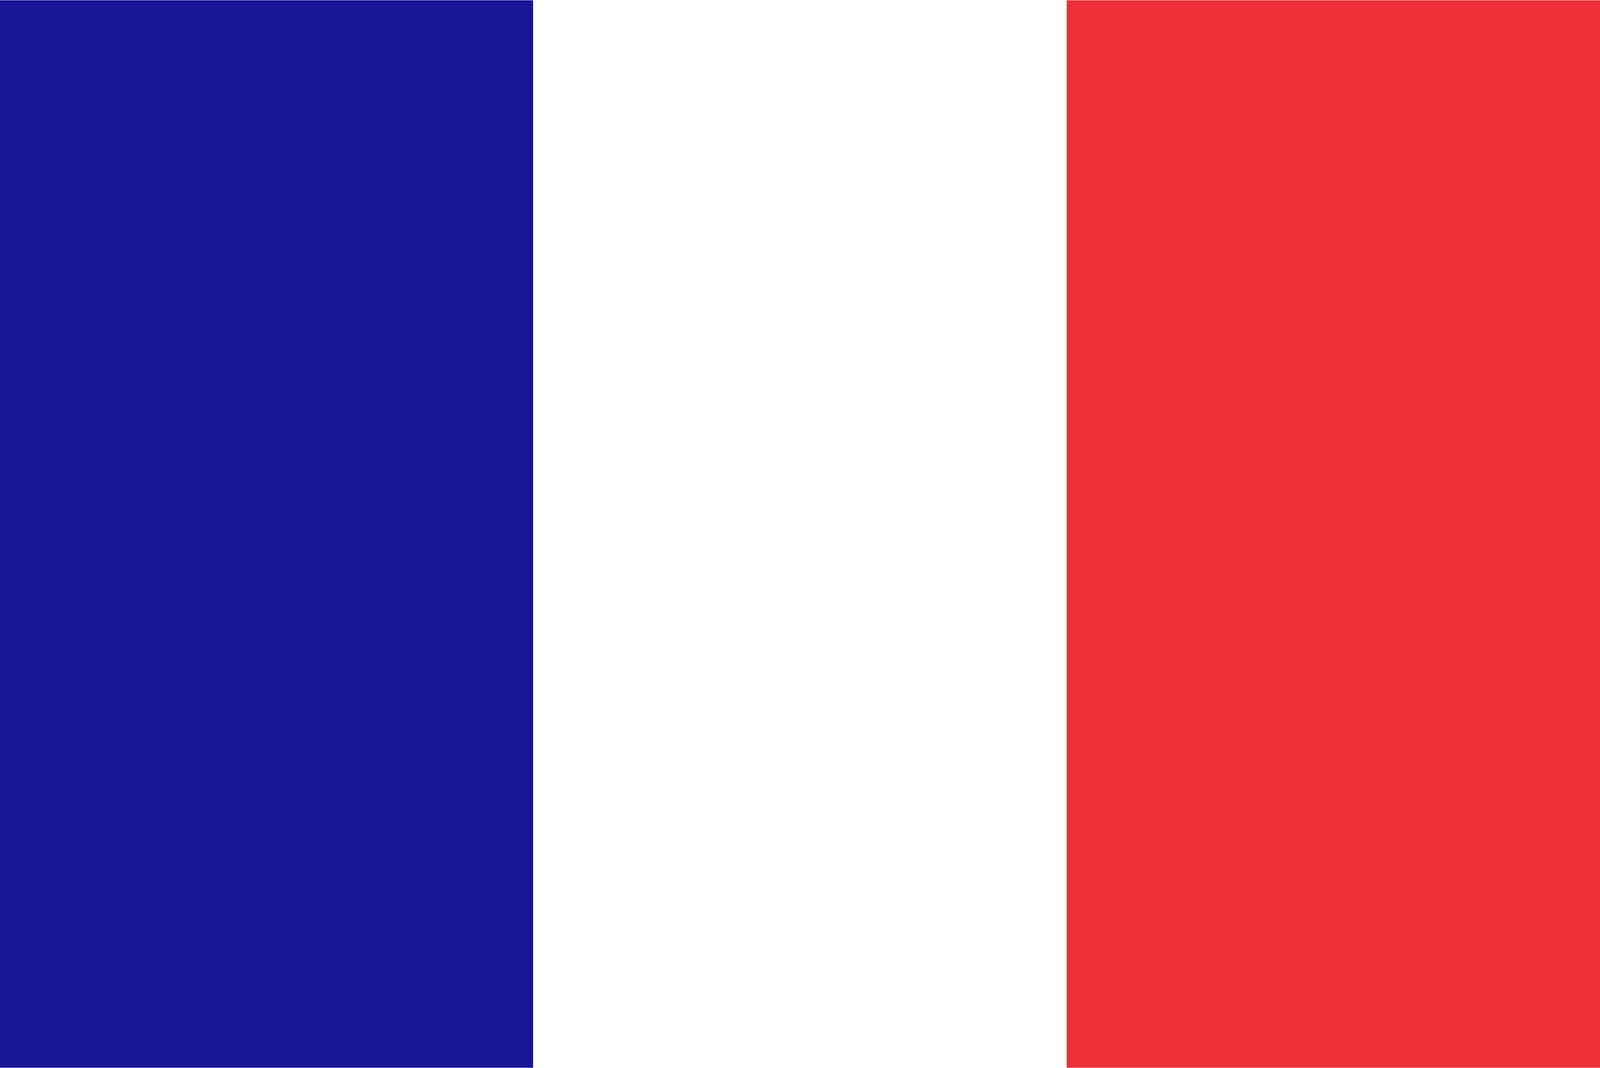 Cutout Image of the French Flag